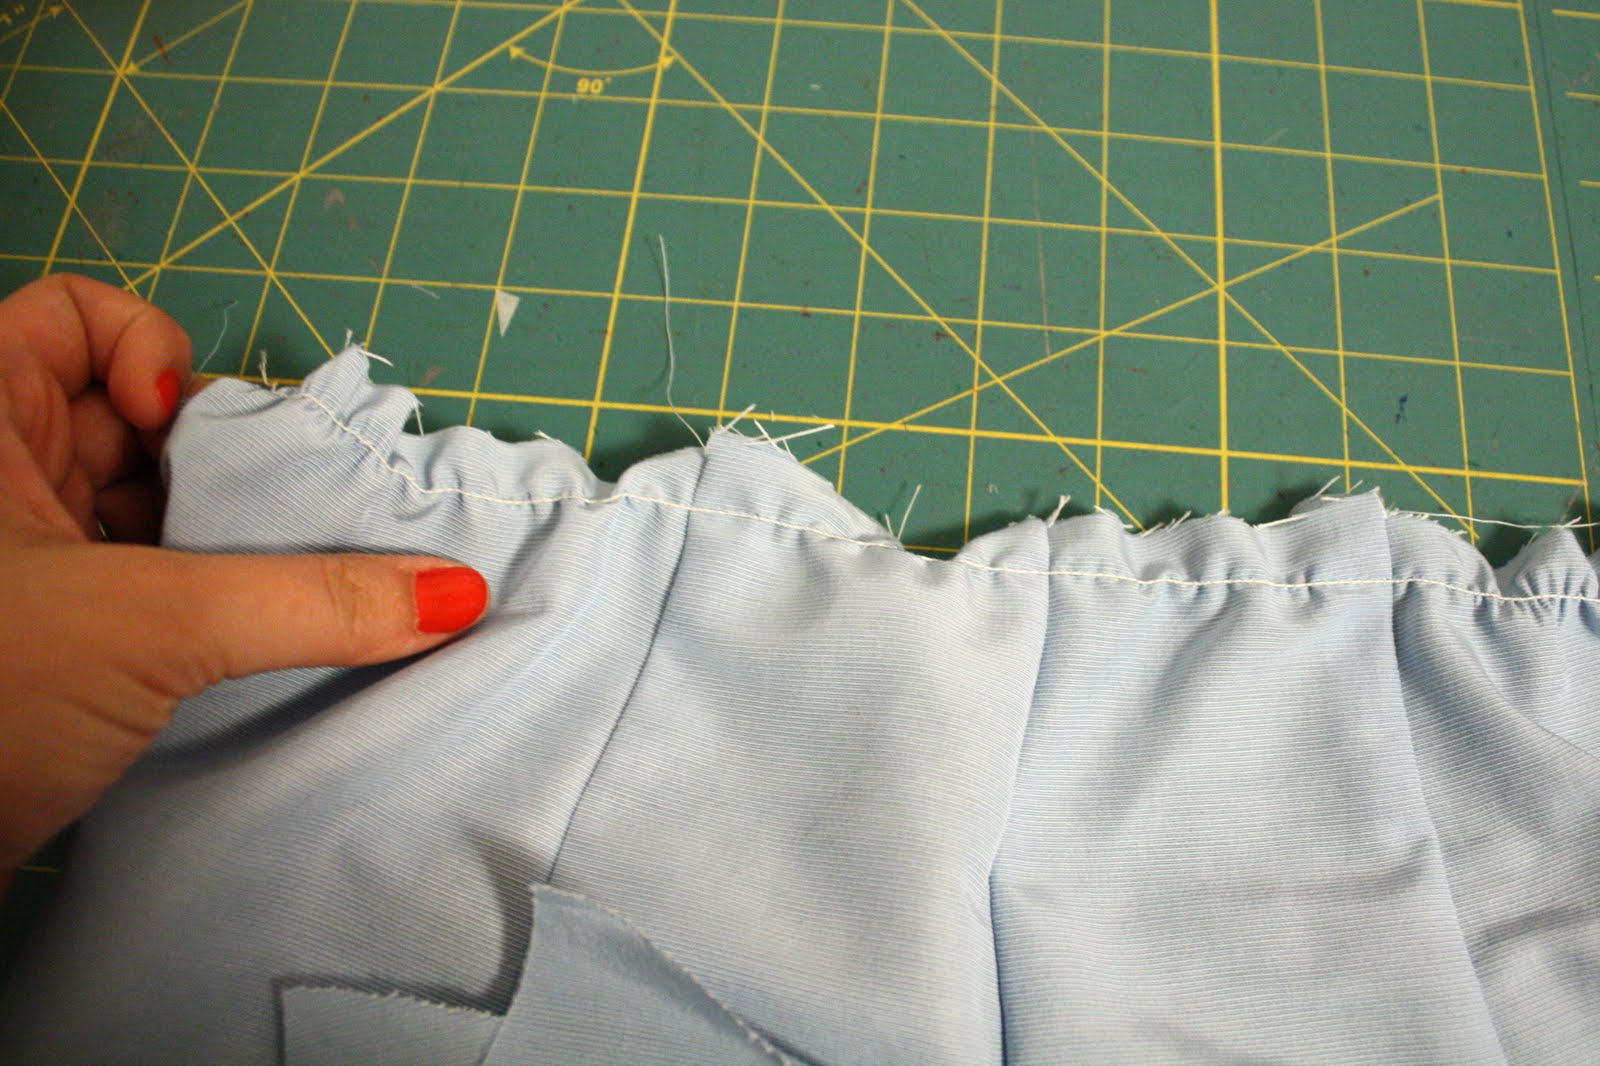 Gertie's New Blog for Better Sewing: Making a Shirred-Back Dress 